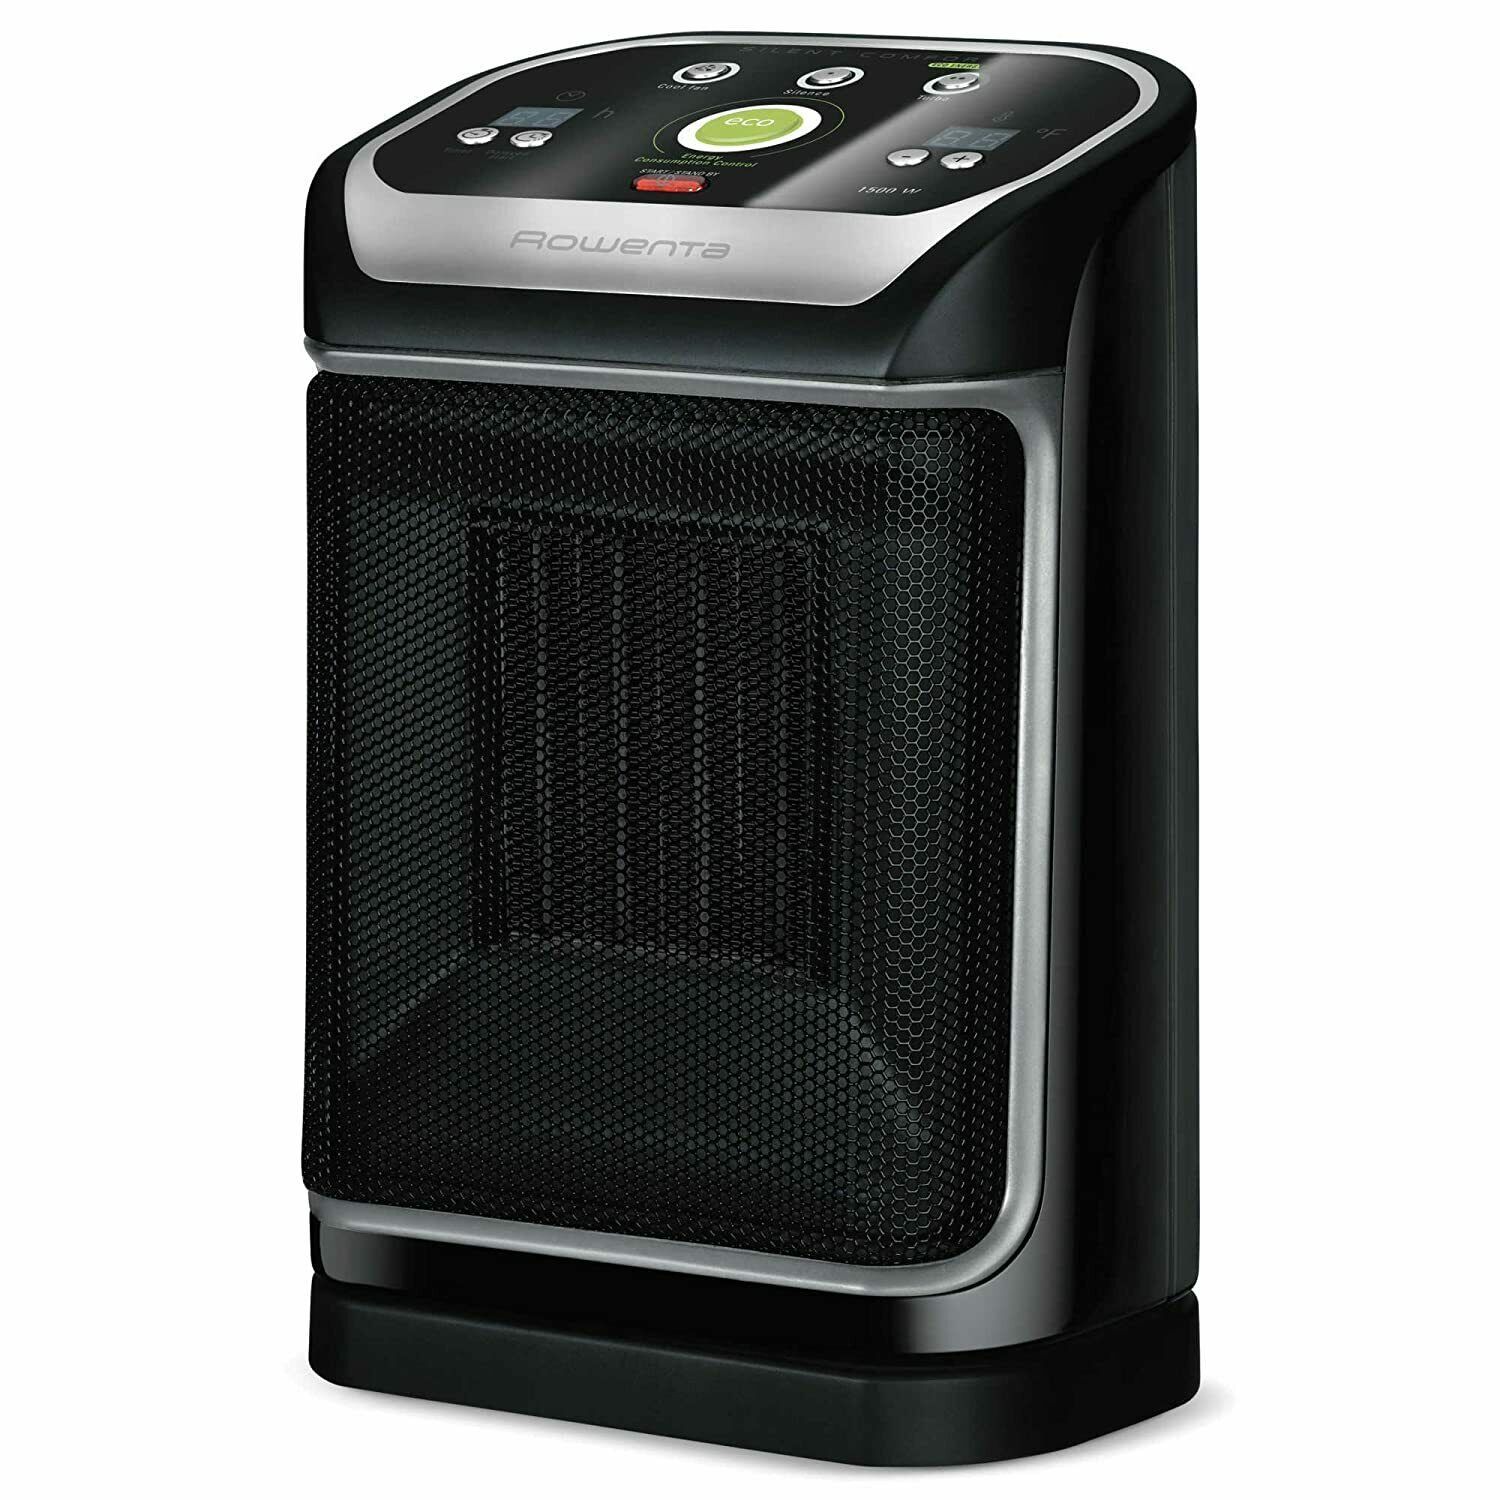 Rowenta SO9276U2 Silence Comfort Heater in Black/Silver Features Auto Off, - $65.44